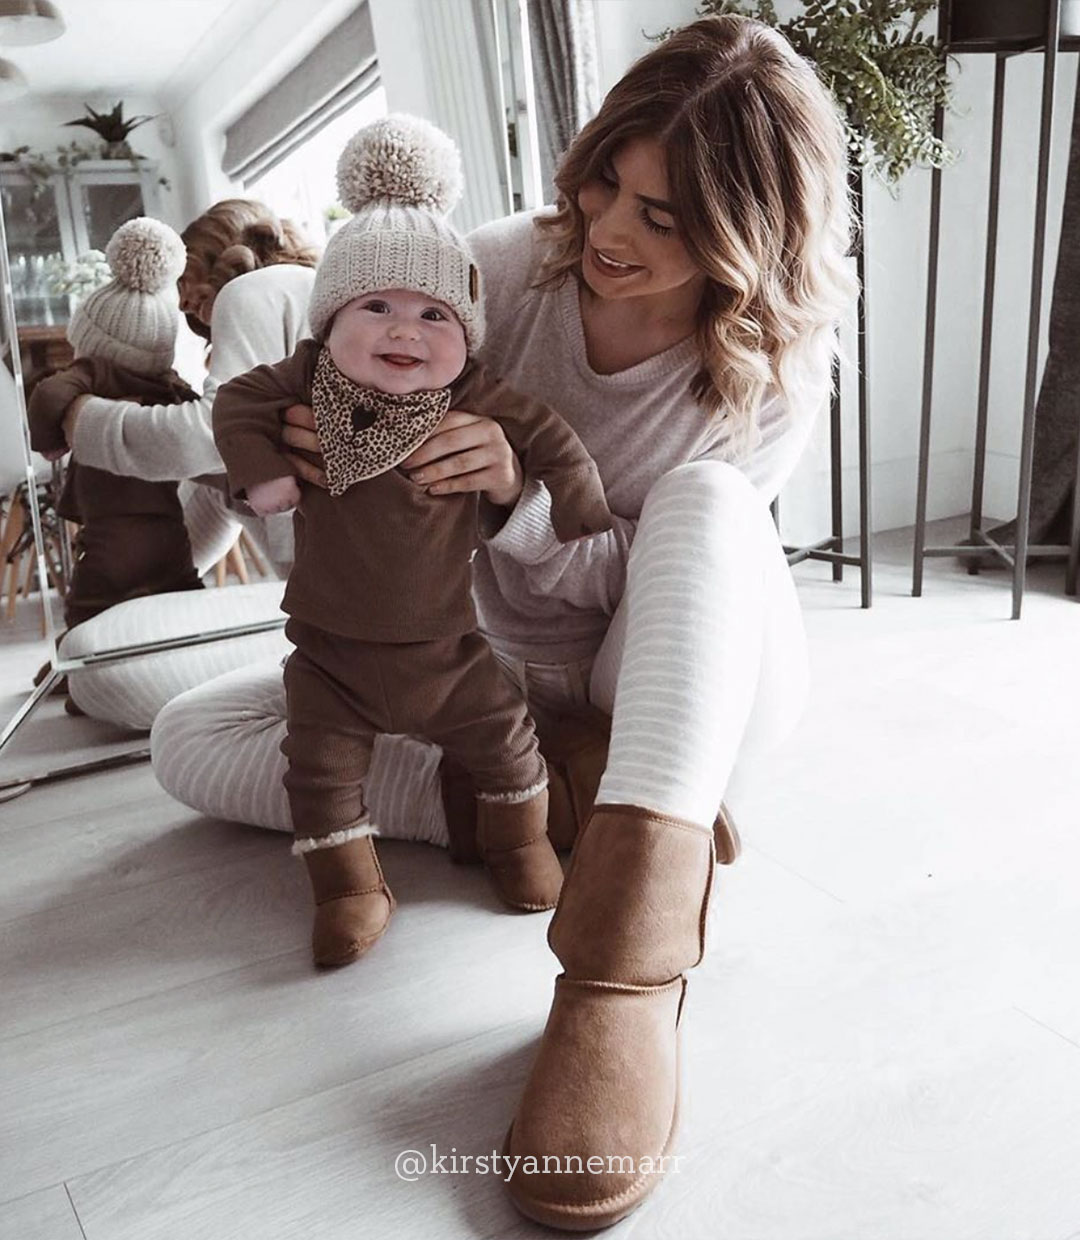 Woman wearing EMU sheepskin boots and sitting on floor holding smiling baby wearing EMU baby booties